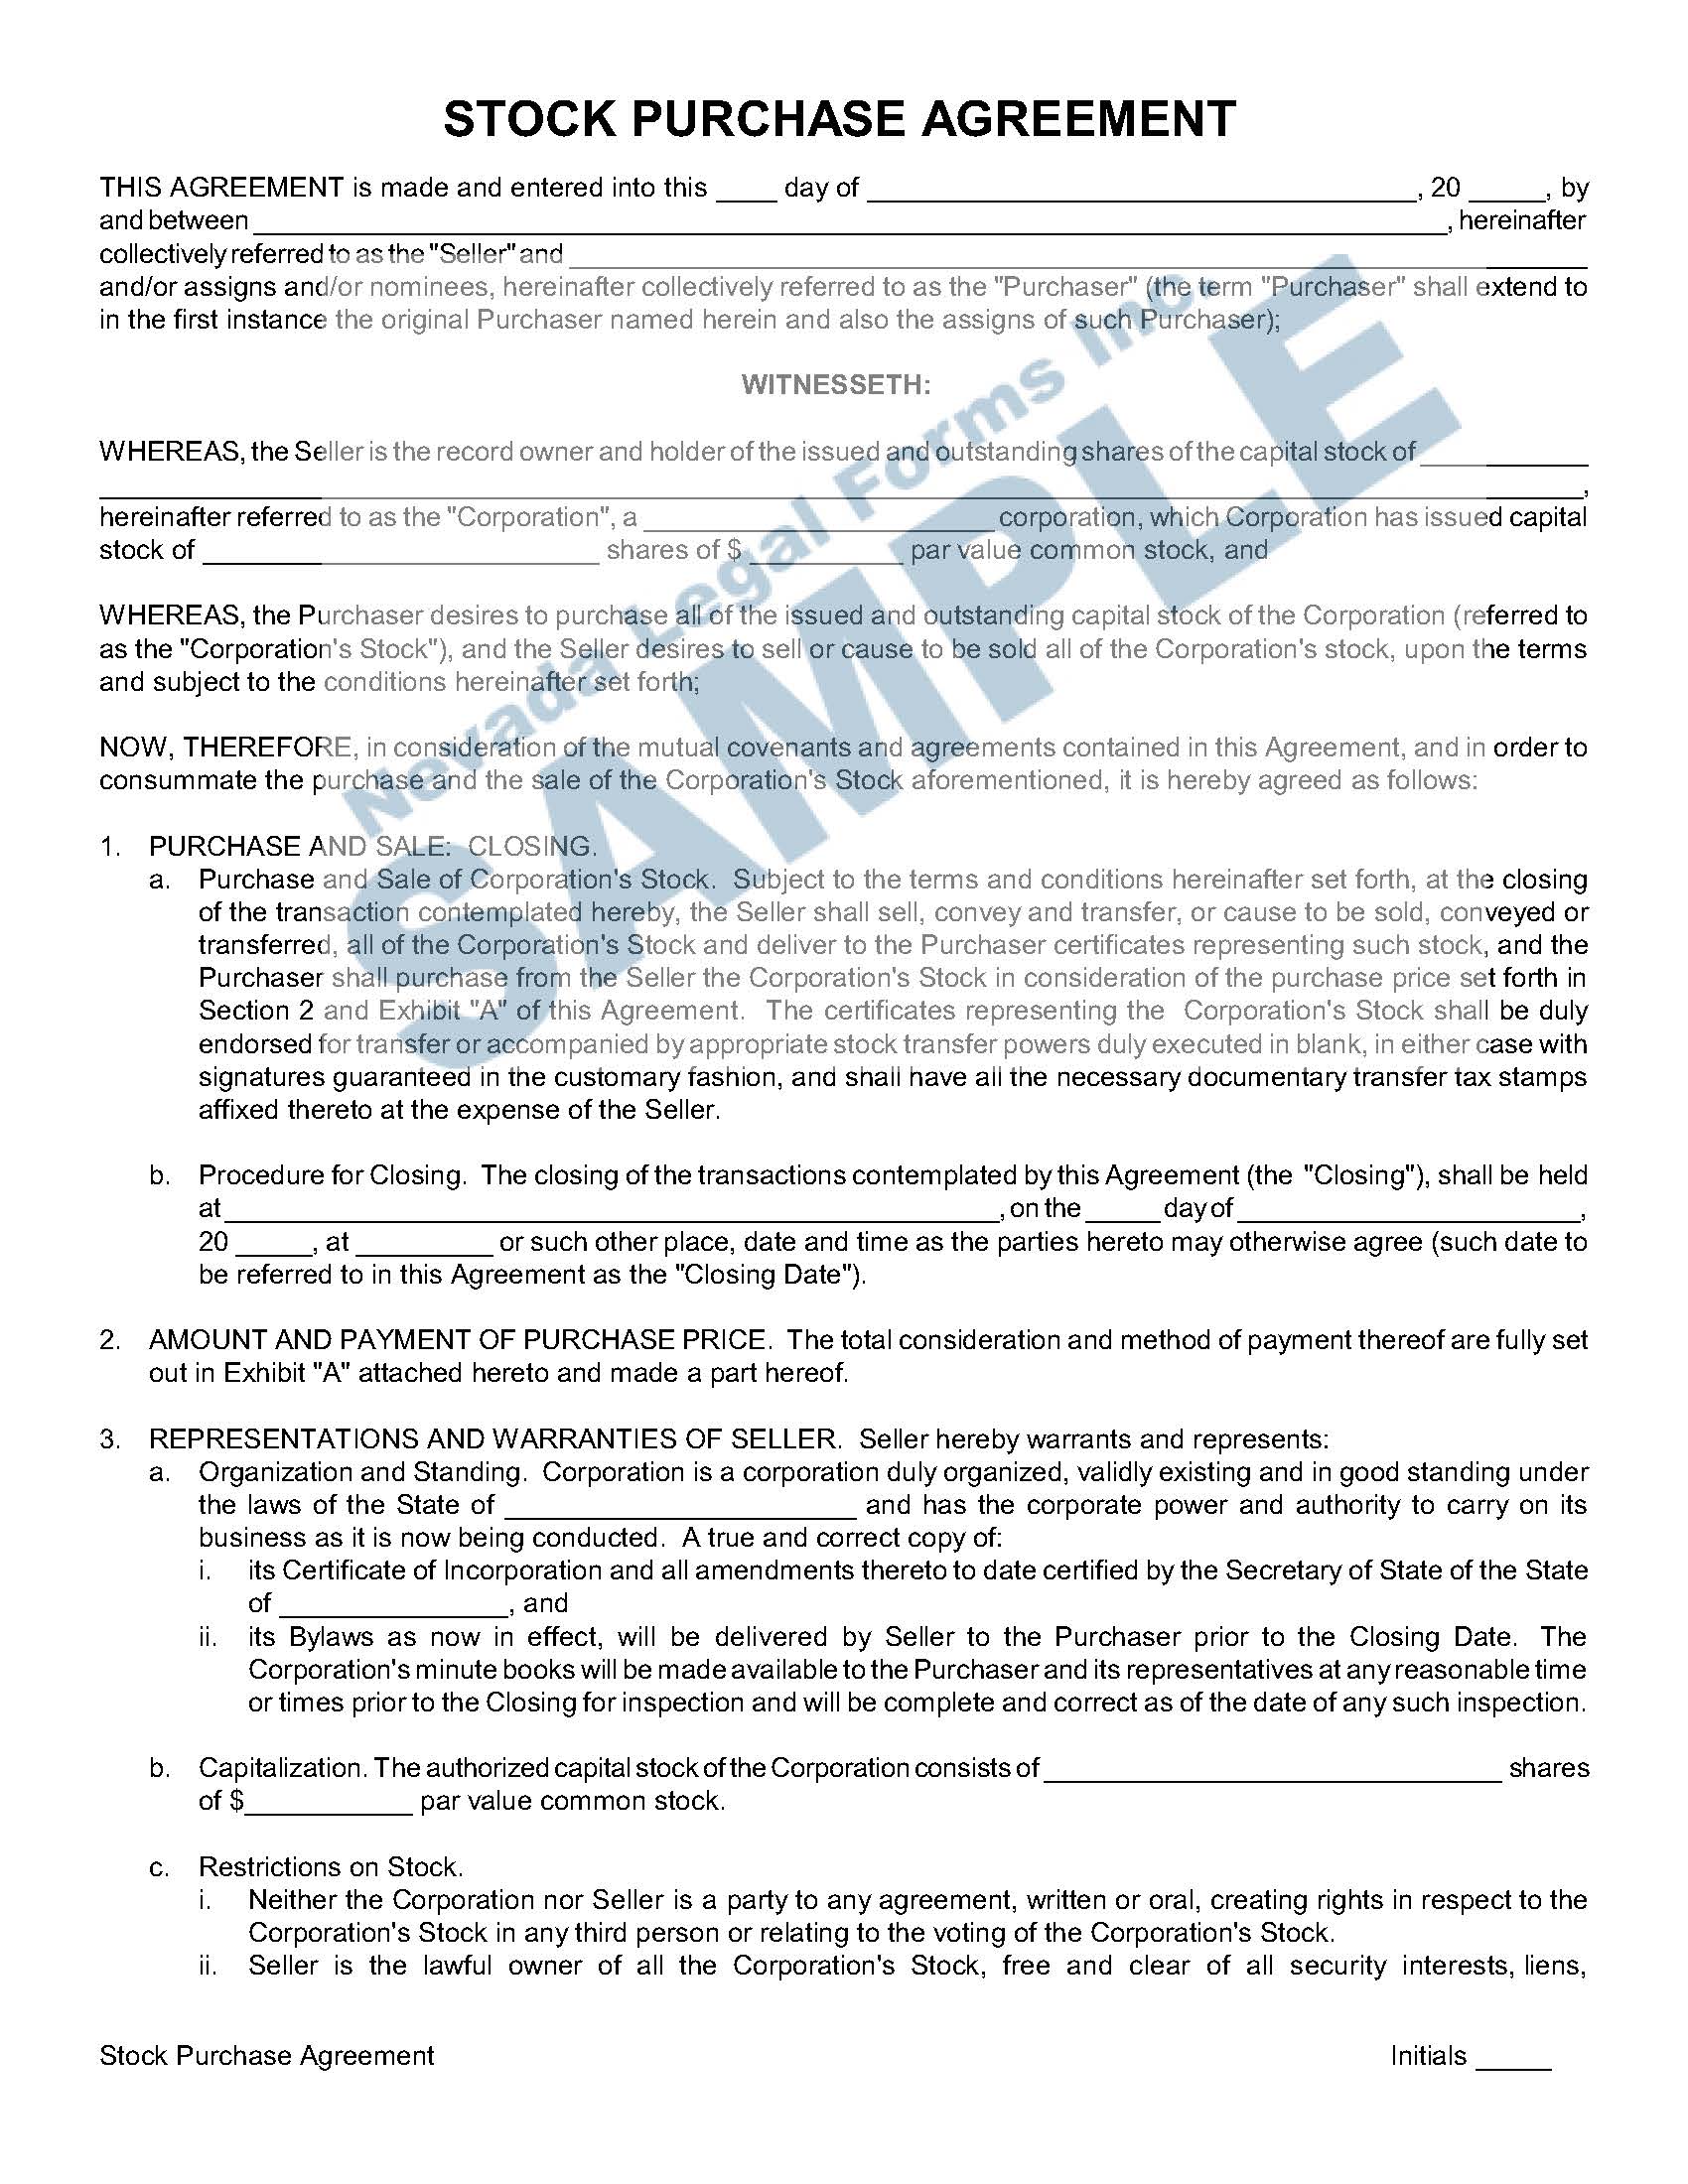 STOCK PURCHASE AGREEMENT With Regard To restricted stock purchase agreement template